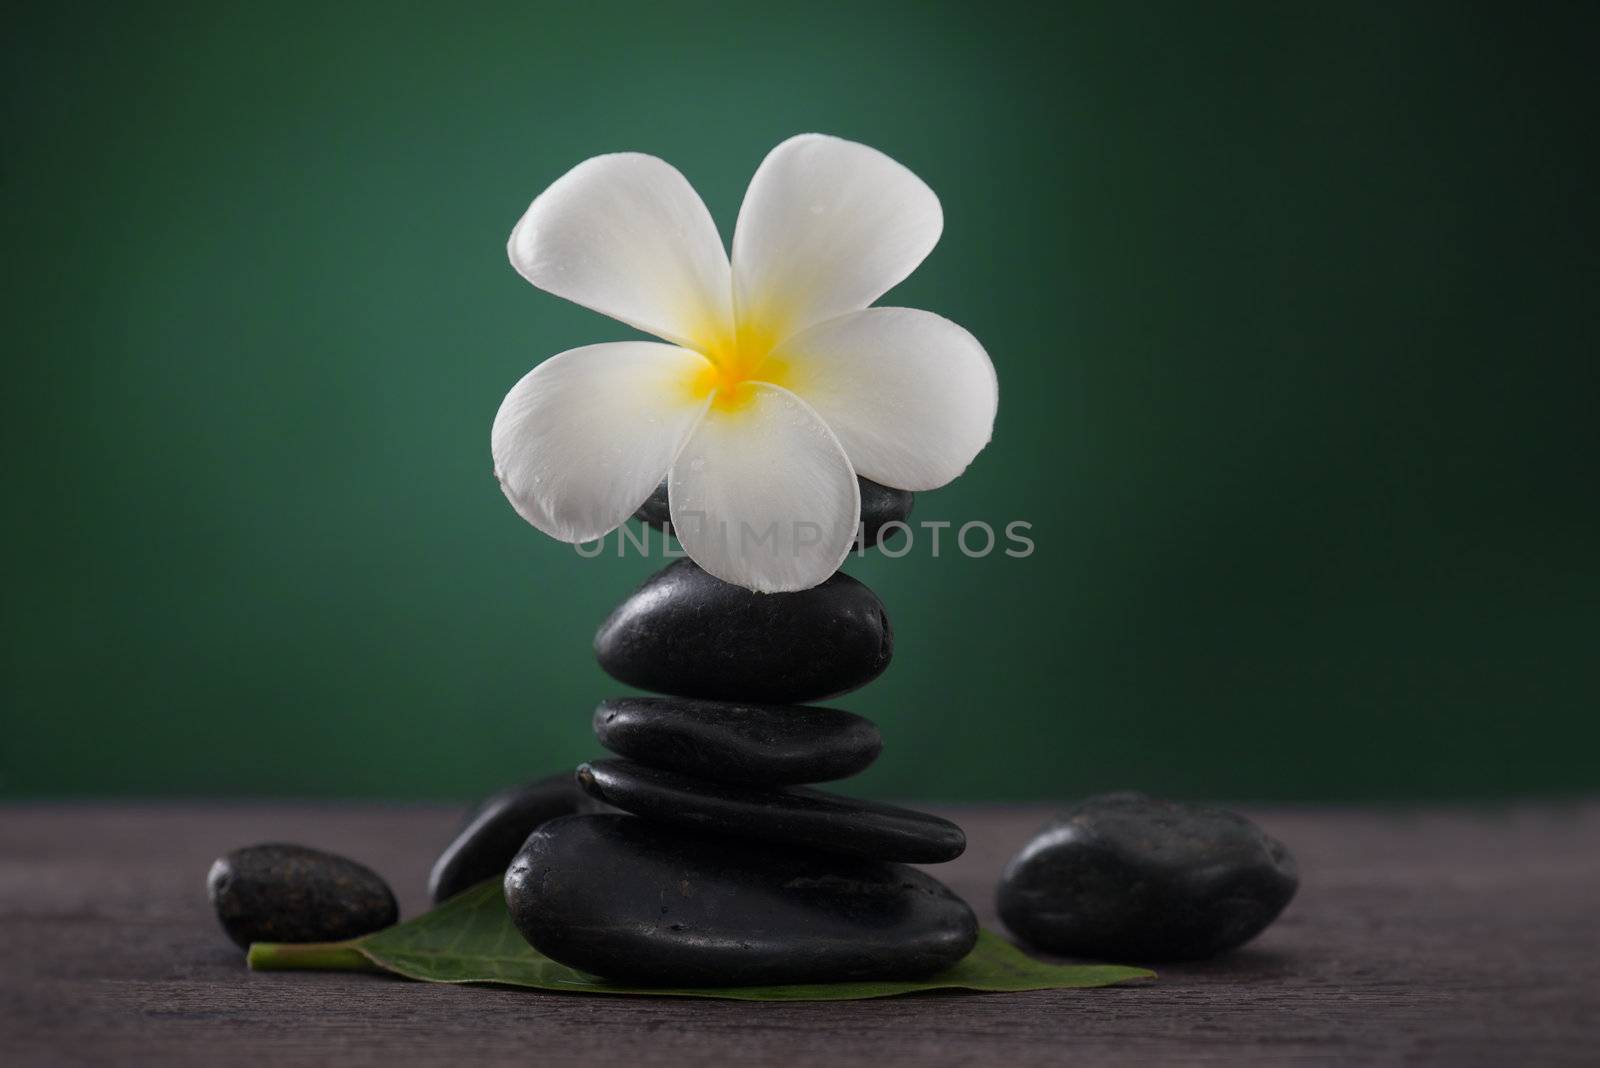 Stacked hot stones for massage spa and frangipani with green background

